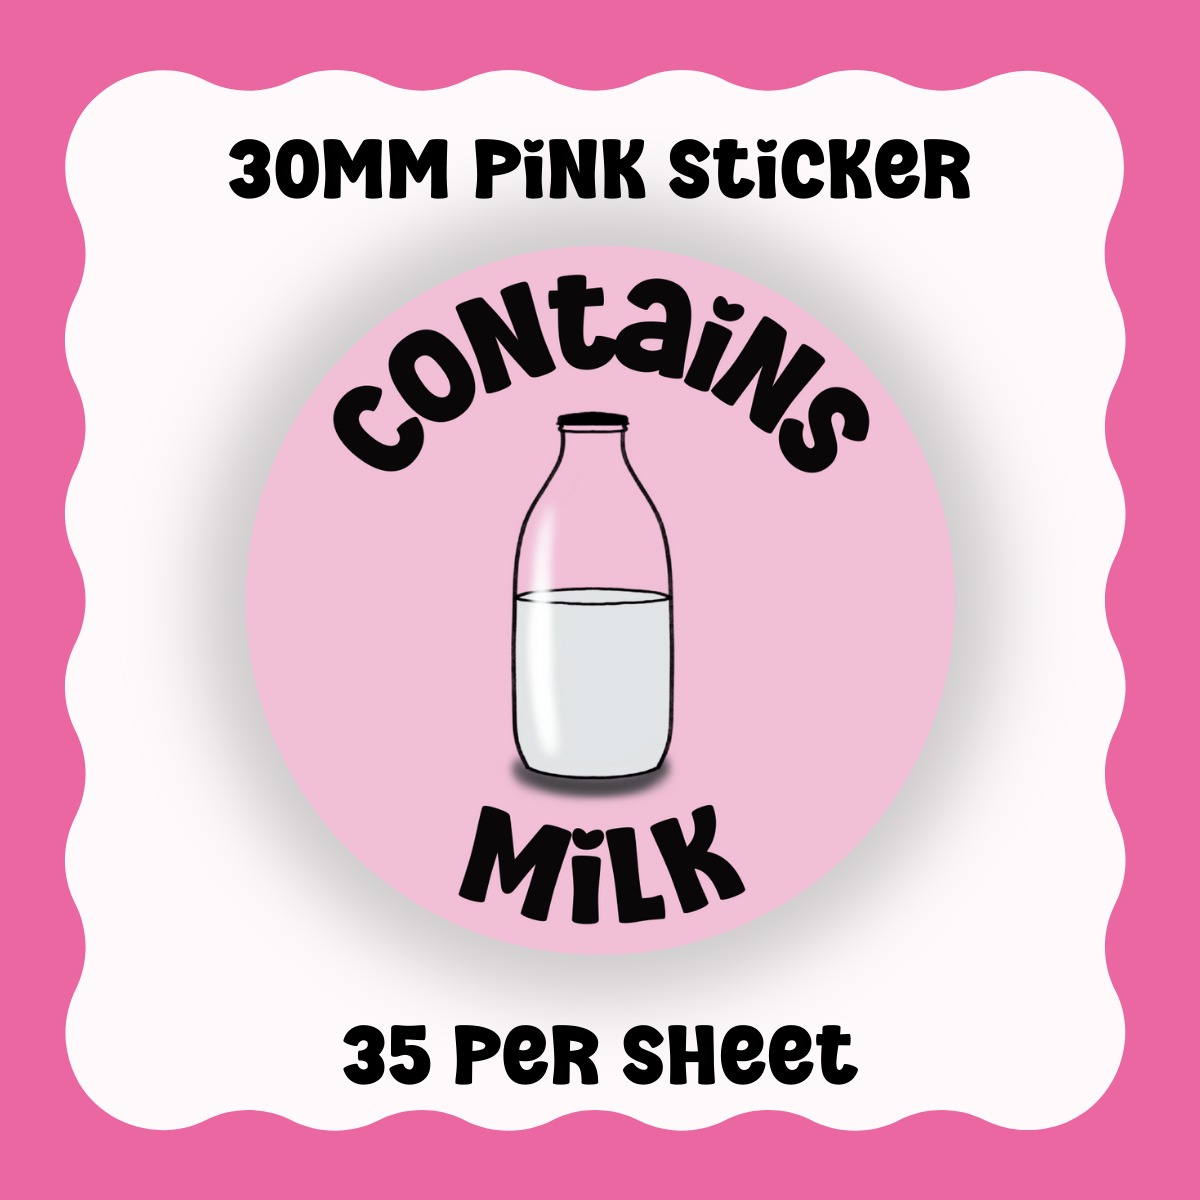 Contains Milk - With Graphic